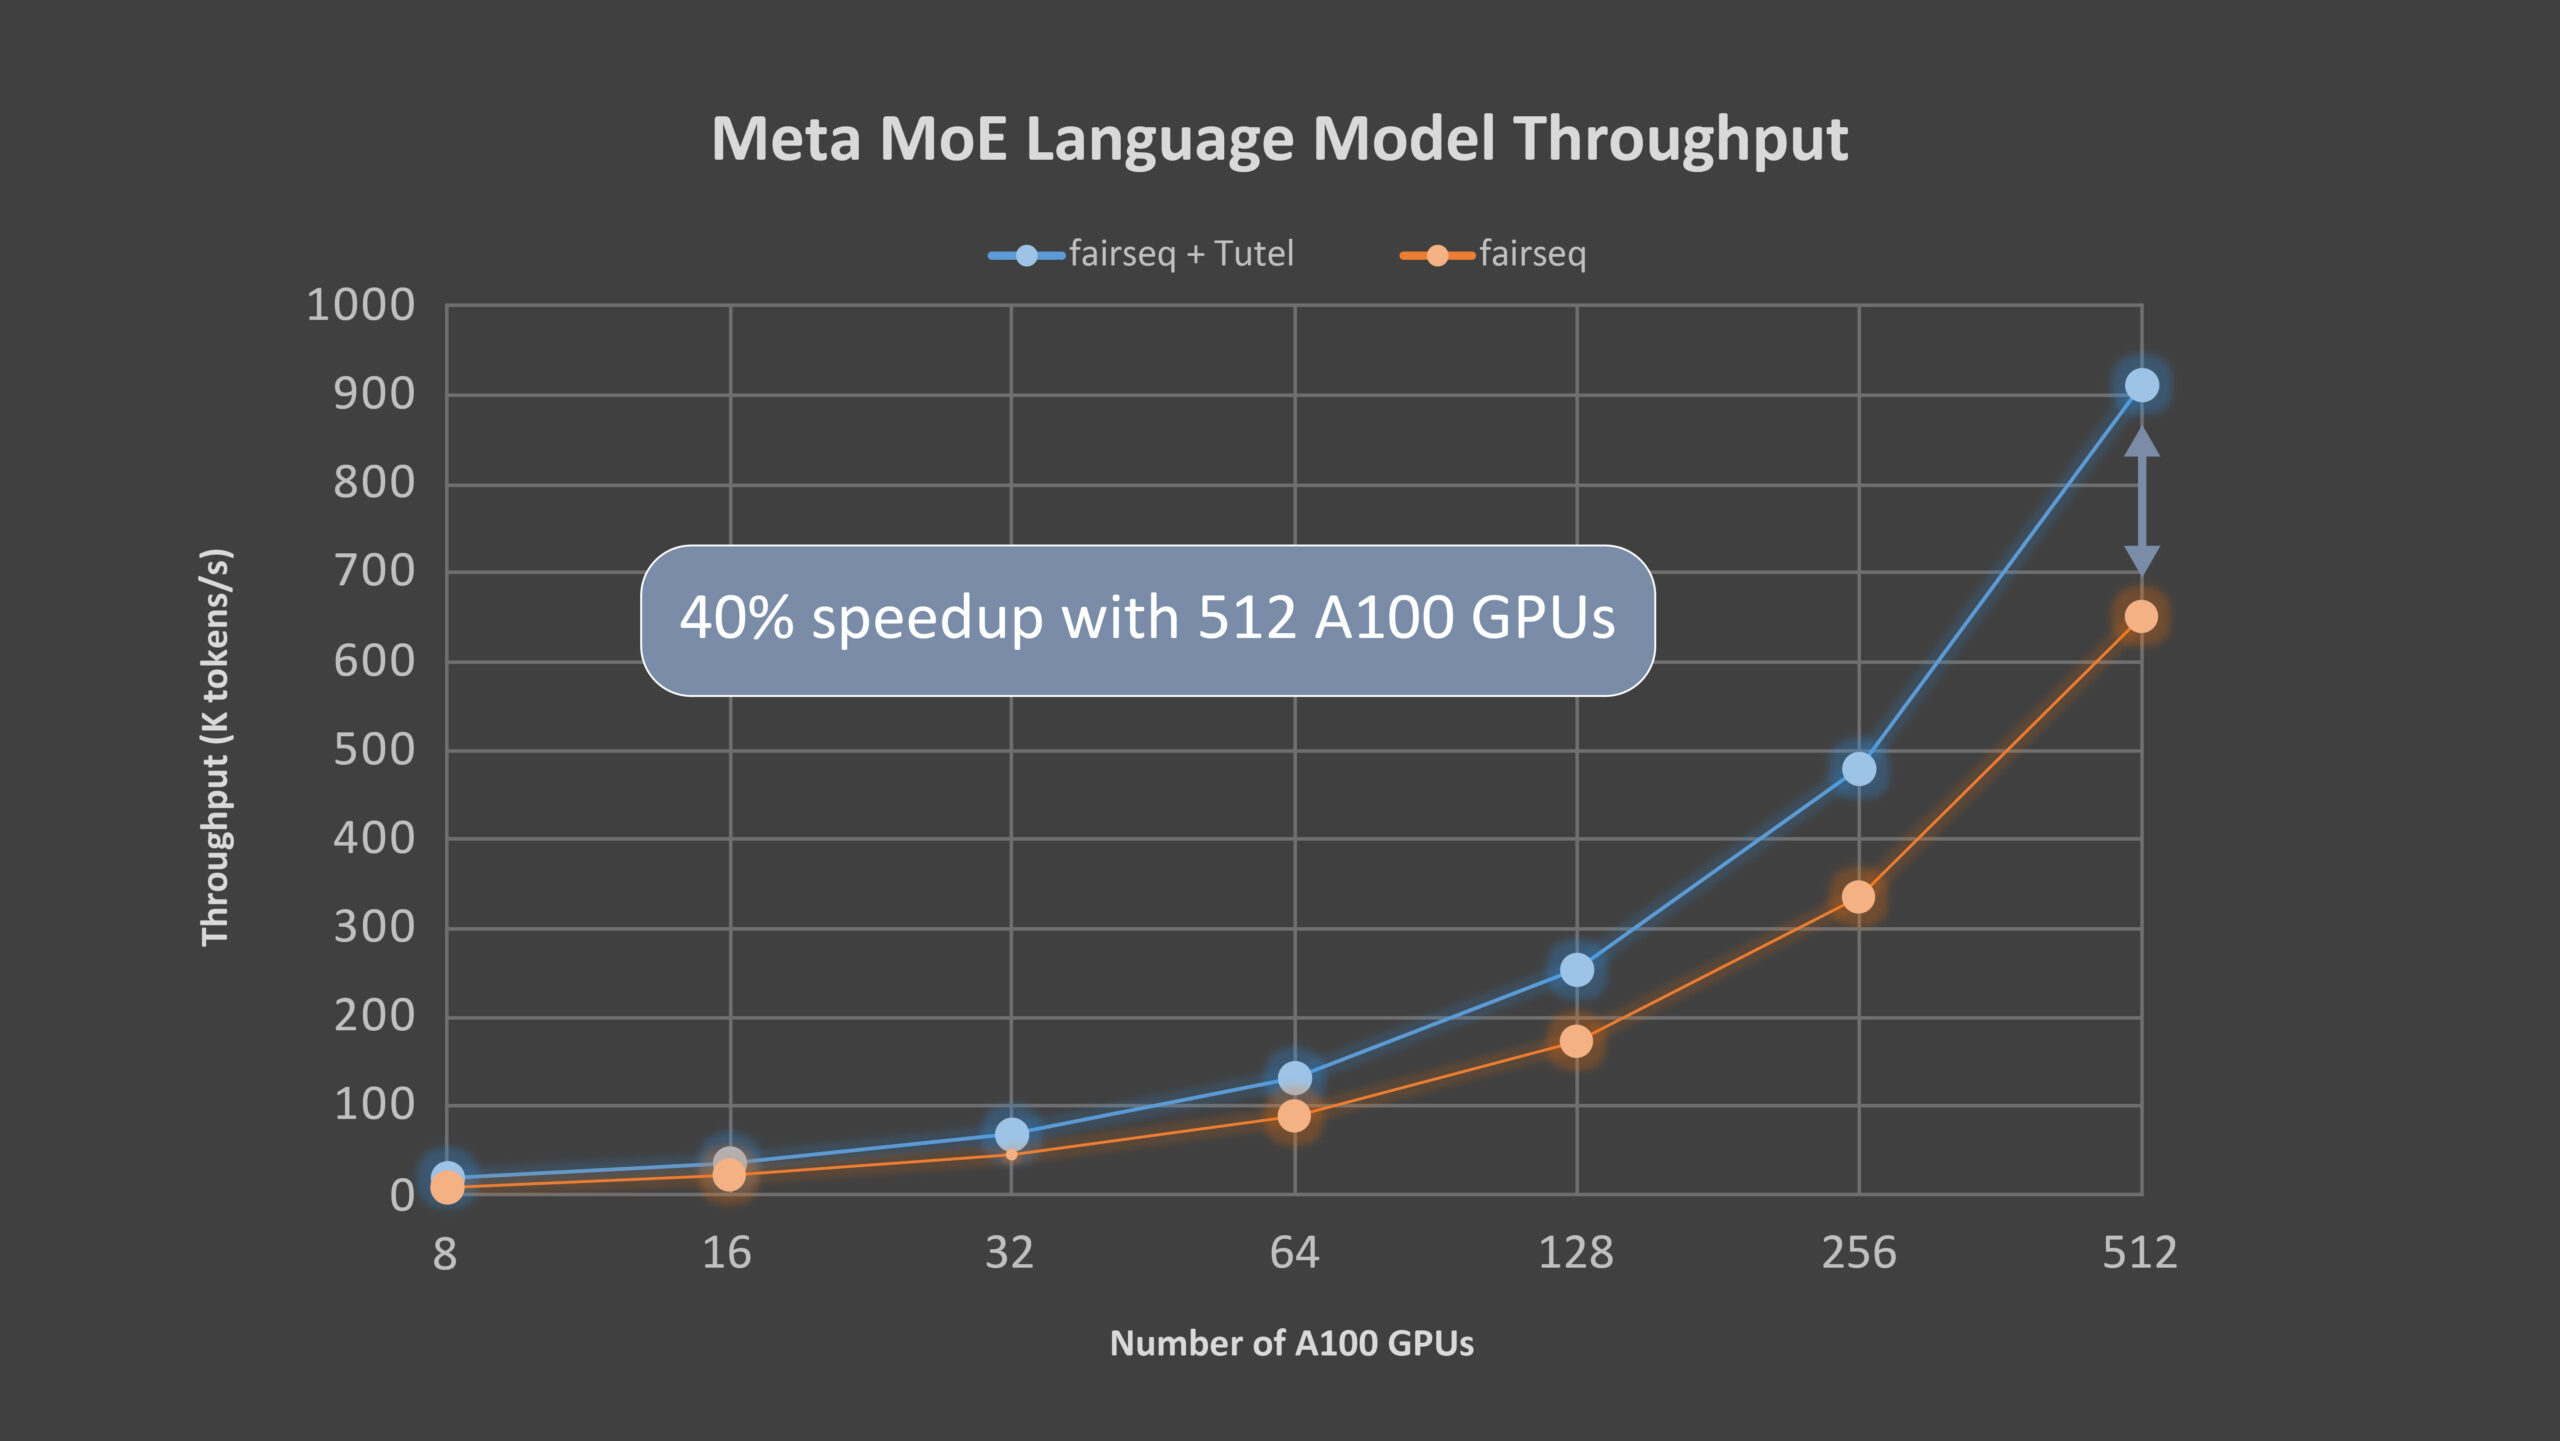 A line graph comparing the end-to-end performance of Meta’s MoE language model using Azure NDm A100 v4 nodes with and without Tutel. The x-axis is the number of A100 (80GB) GPUs, beginning at 8 and going up to 512, and the y-axis is the throughput (K tokens/s), beginning with 0 and going up to 1,000 in intervals of 100. Tutel always achieves higher throughput than fairseq. 